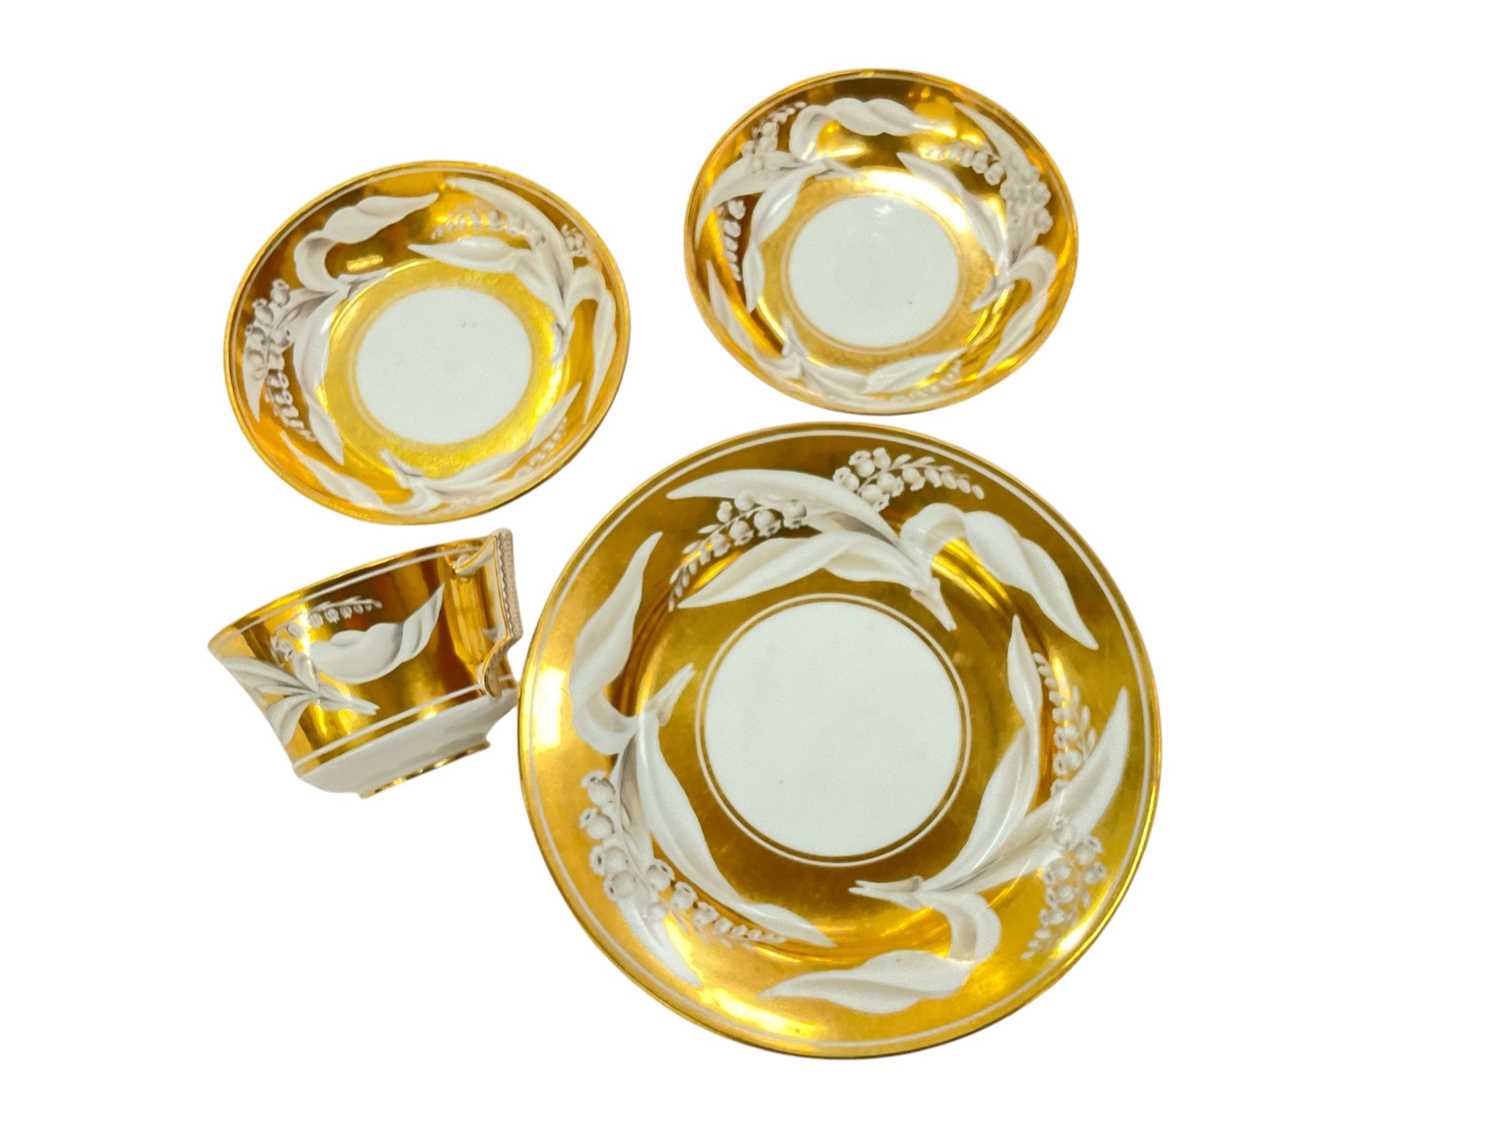 Wedgwood bone china gold ground Lily of the Valley teacup, two saucers and a plate - Image 2 of 10